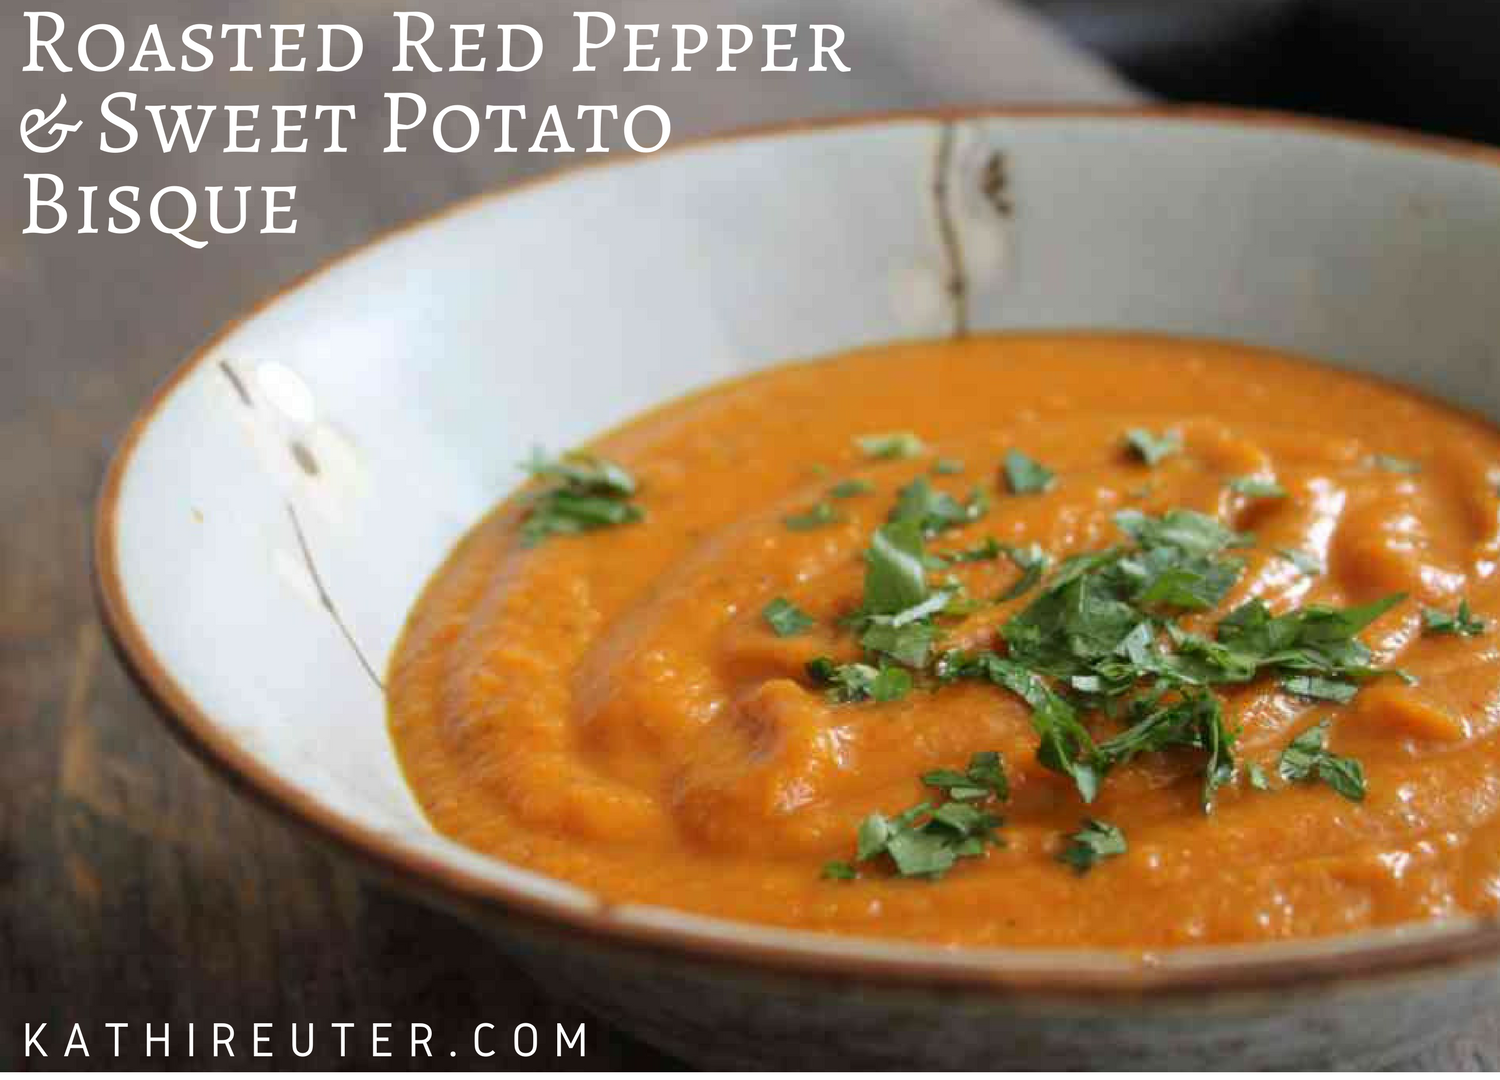 Roasted Red Pepper & Sweet Potato Bisque